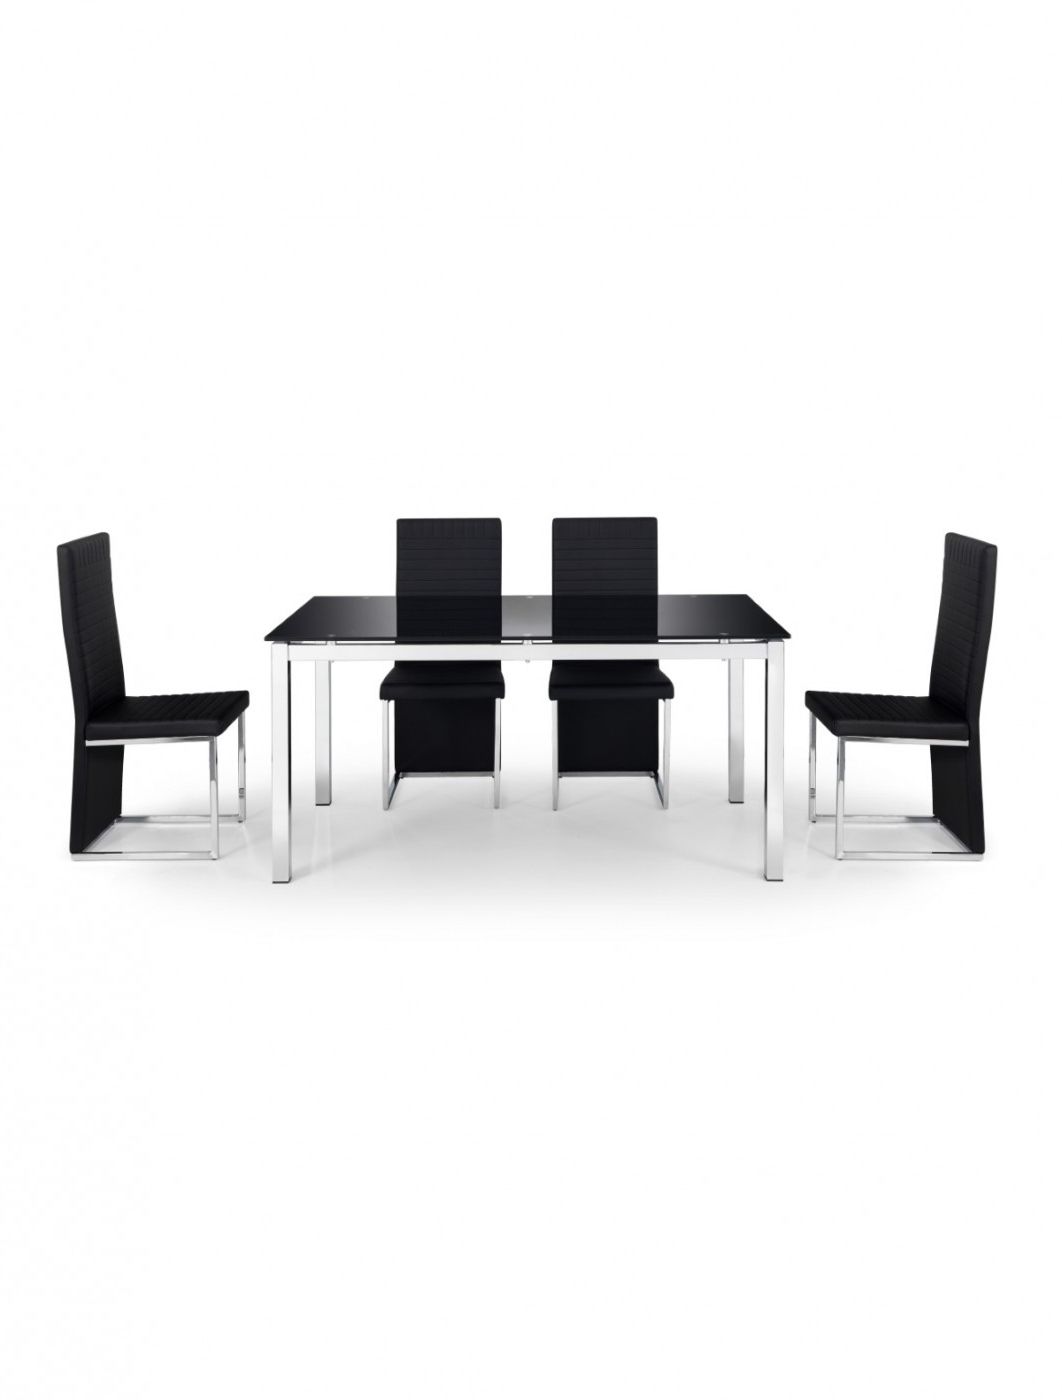 Most Recent Tempo Glass Dining Table And 4 Dining Chairs Tem901 Within Black Glass Dining Tables And 4 Chairs (View 14 of 25)